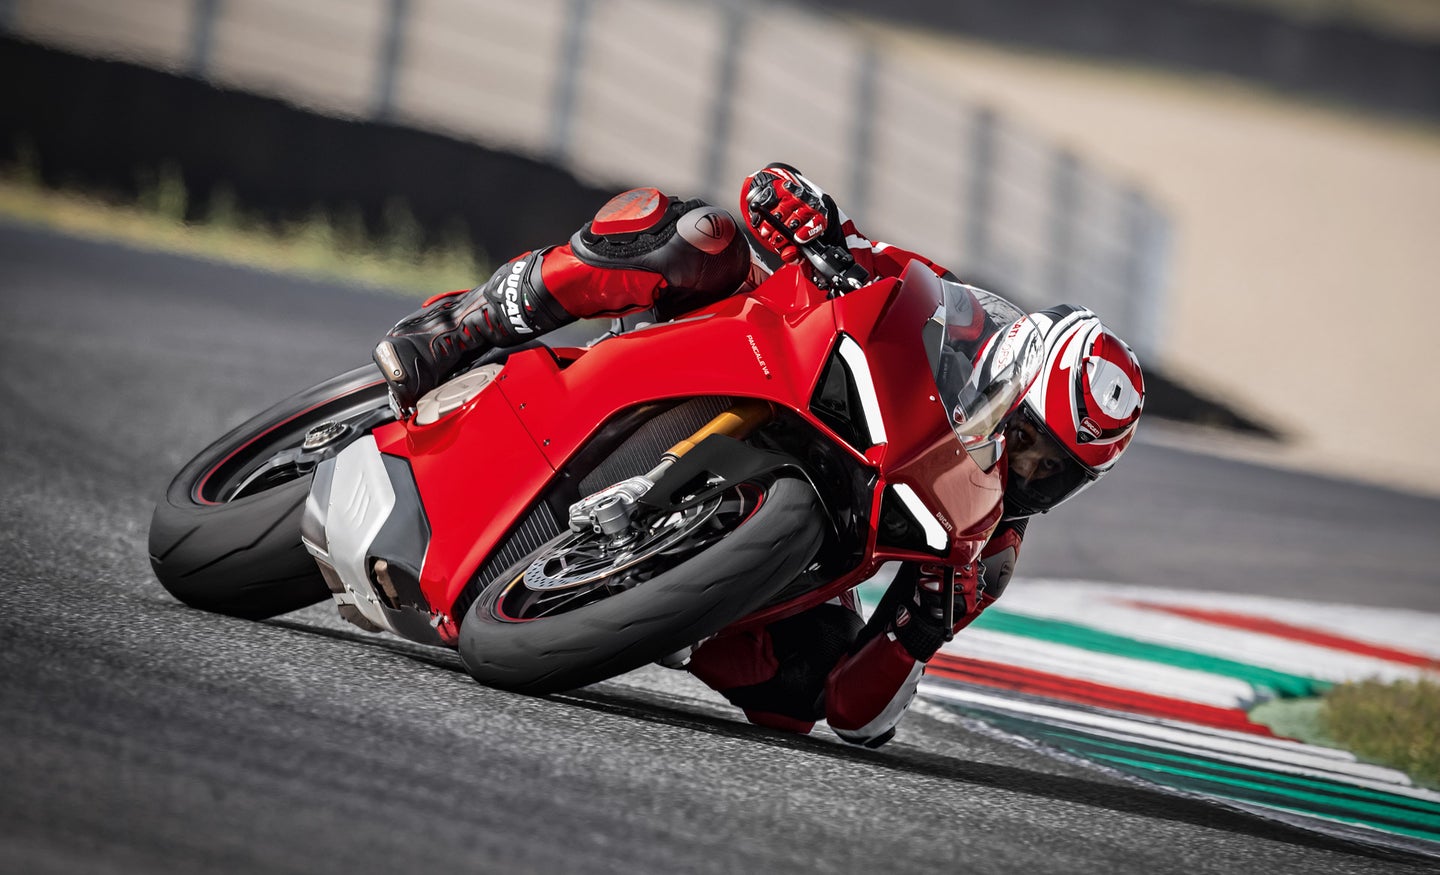 The New Ducati Panigale V4 Is an Italian Fighter Jet on Two Wheels